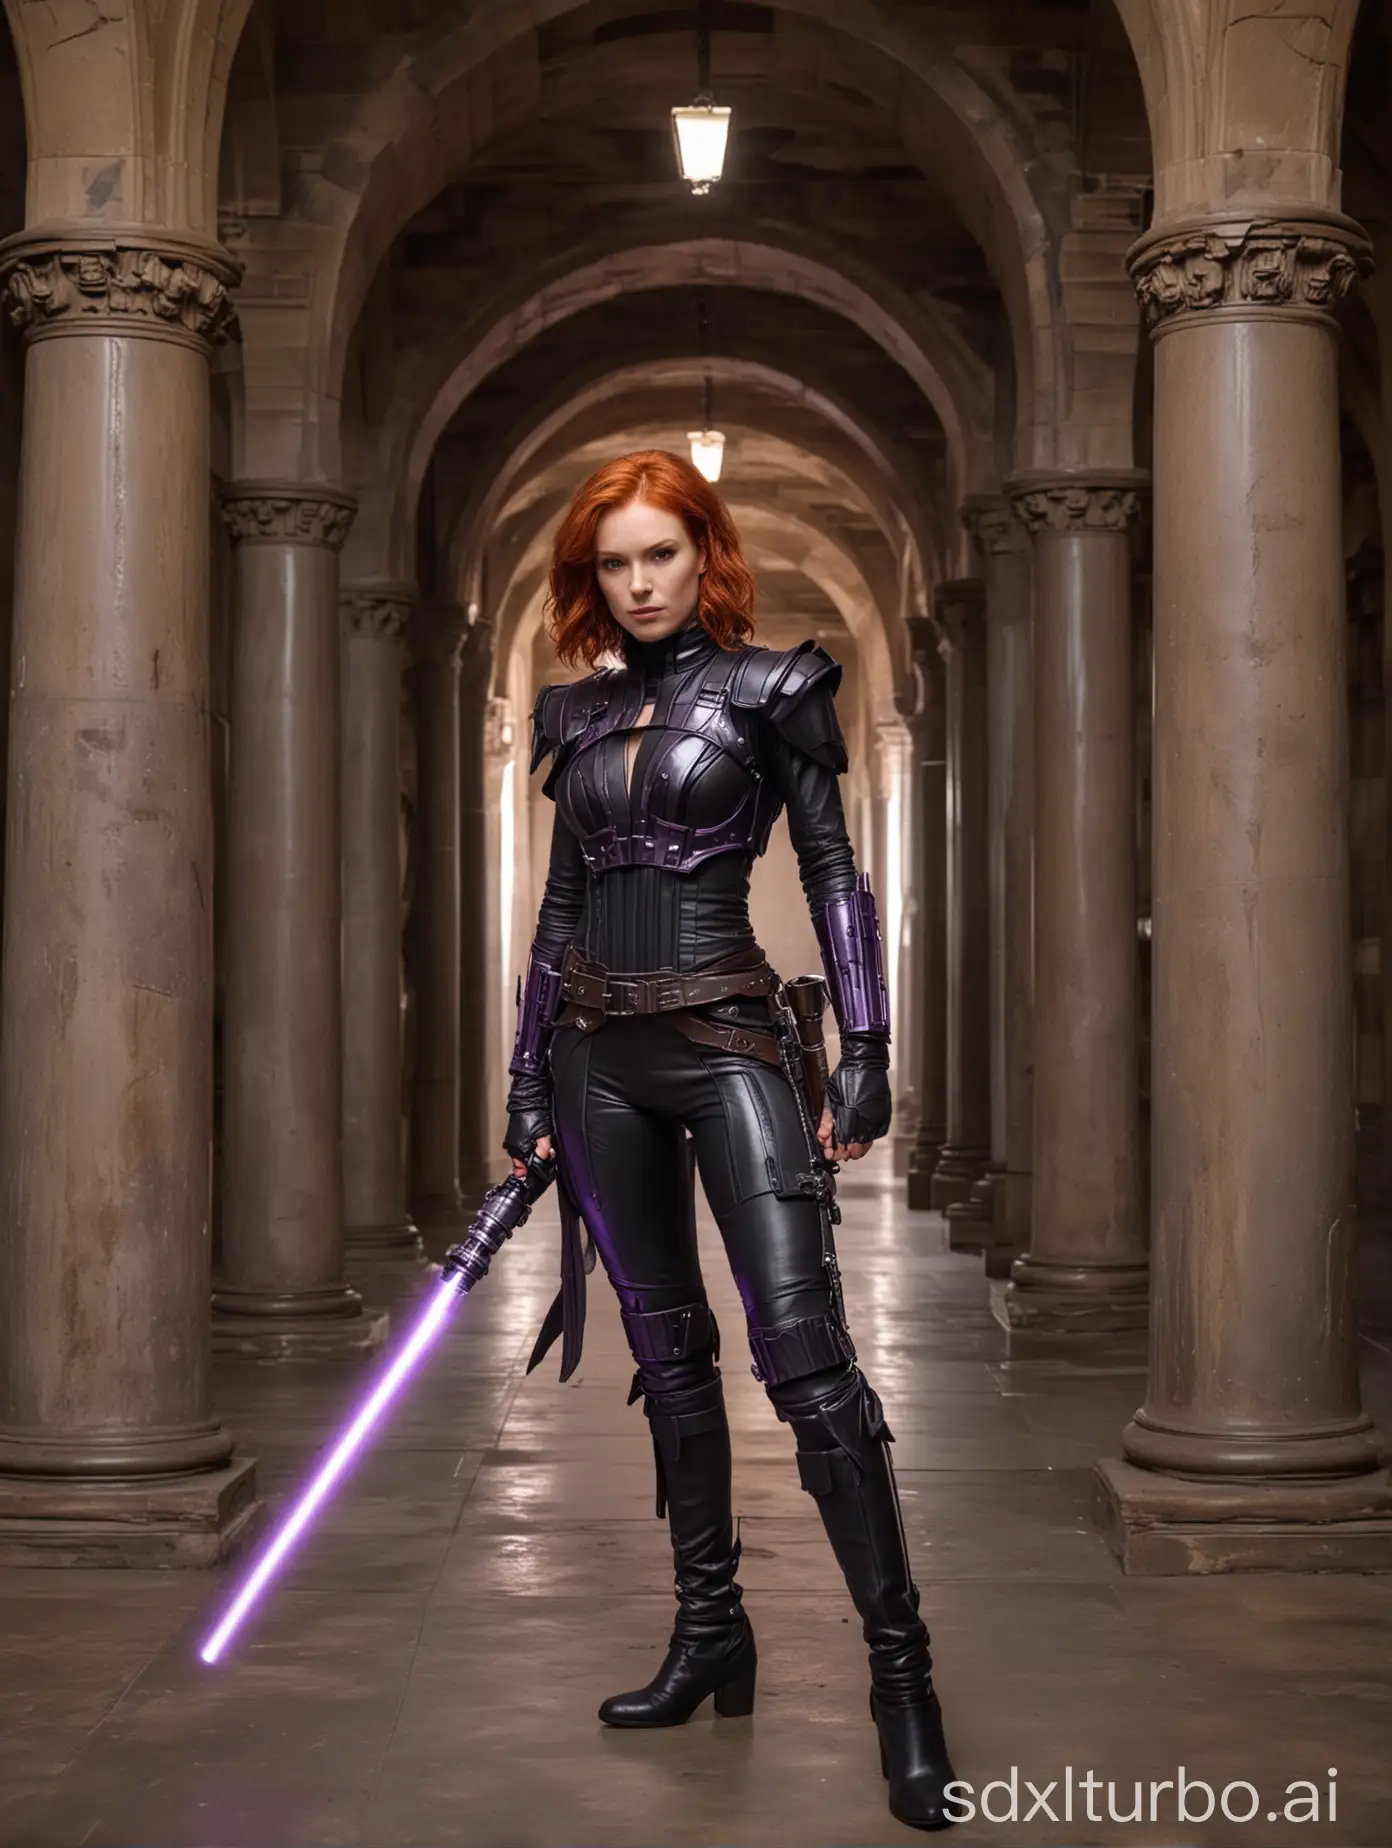 A red-haired woman in a leather outfit holds a lightsaber. She stands in a hallway with arches and pillars. The lightsaber is purple and has a metal handgrip.